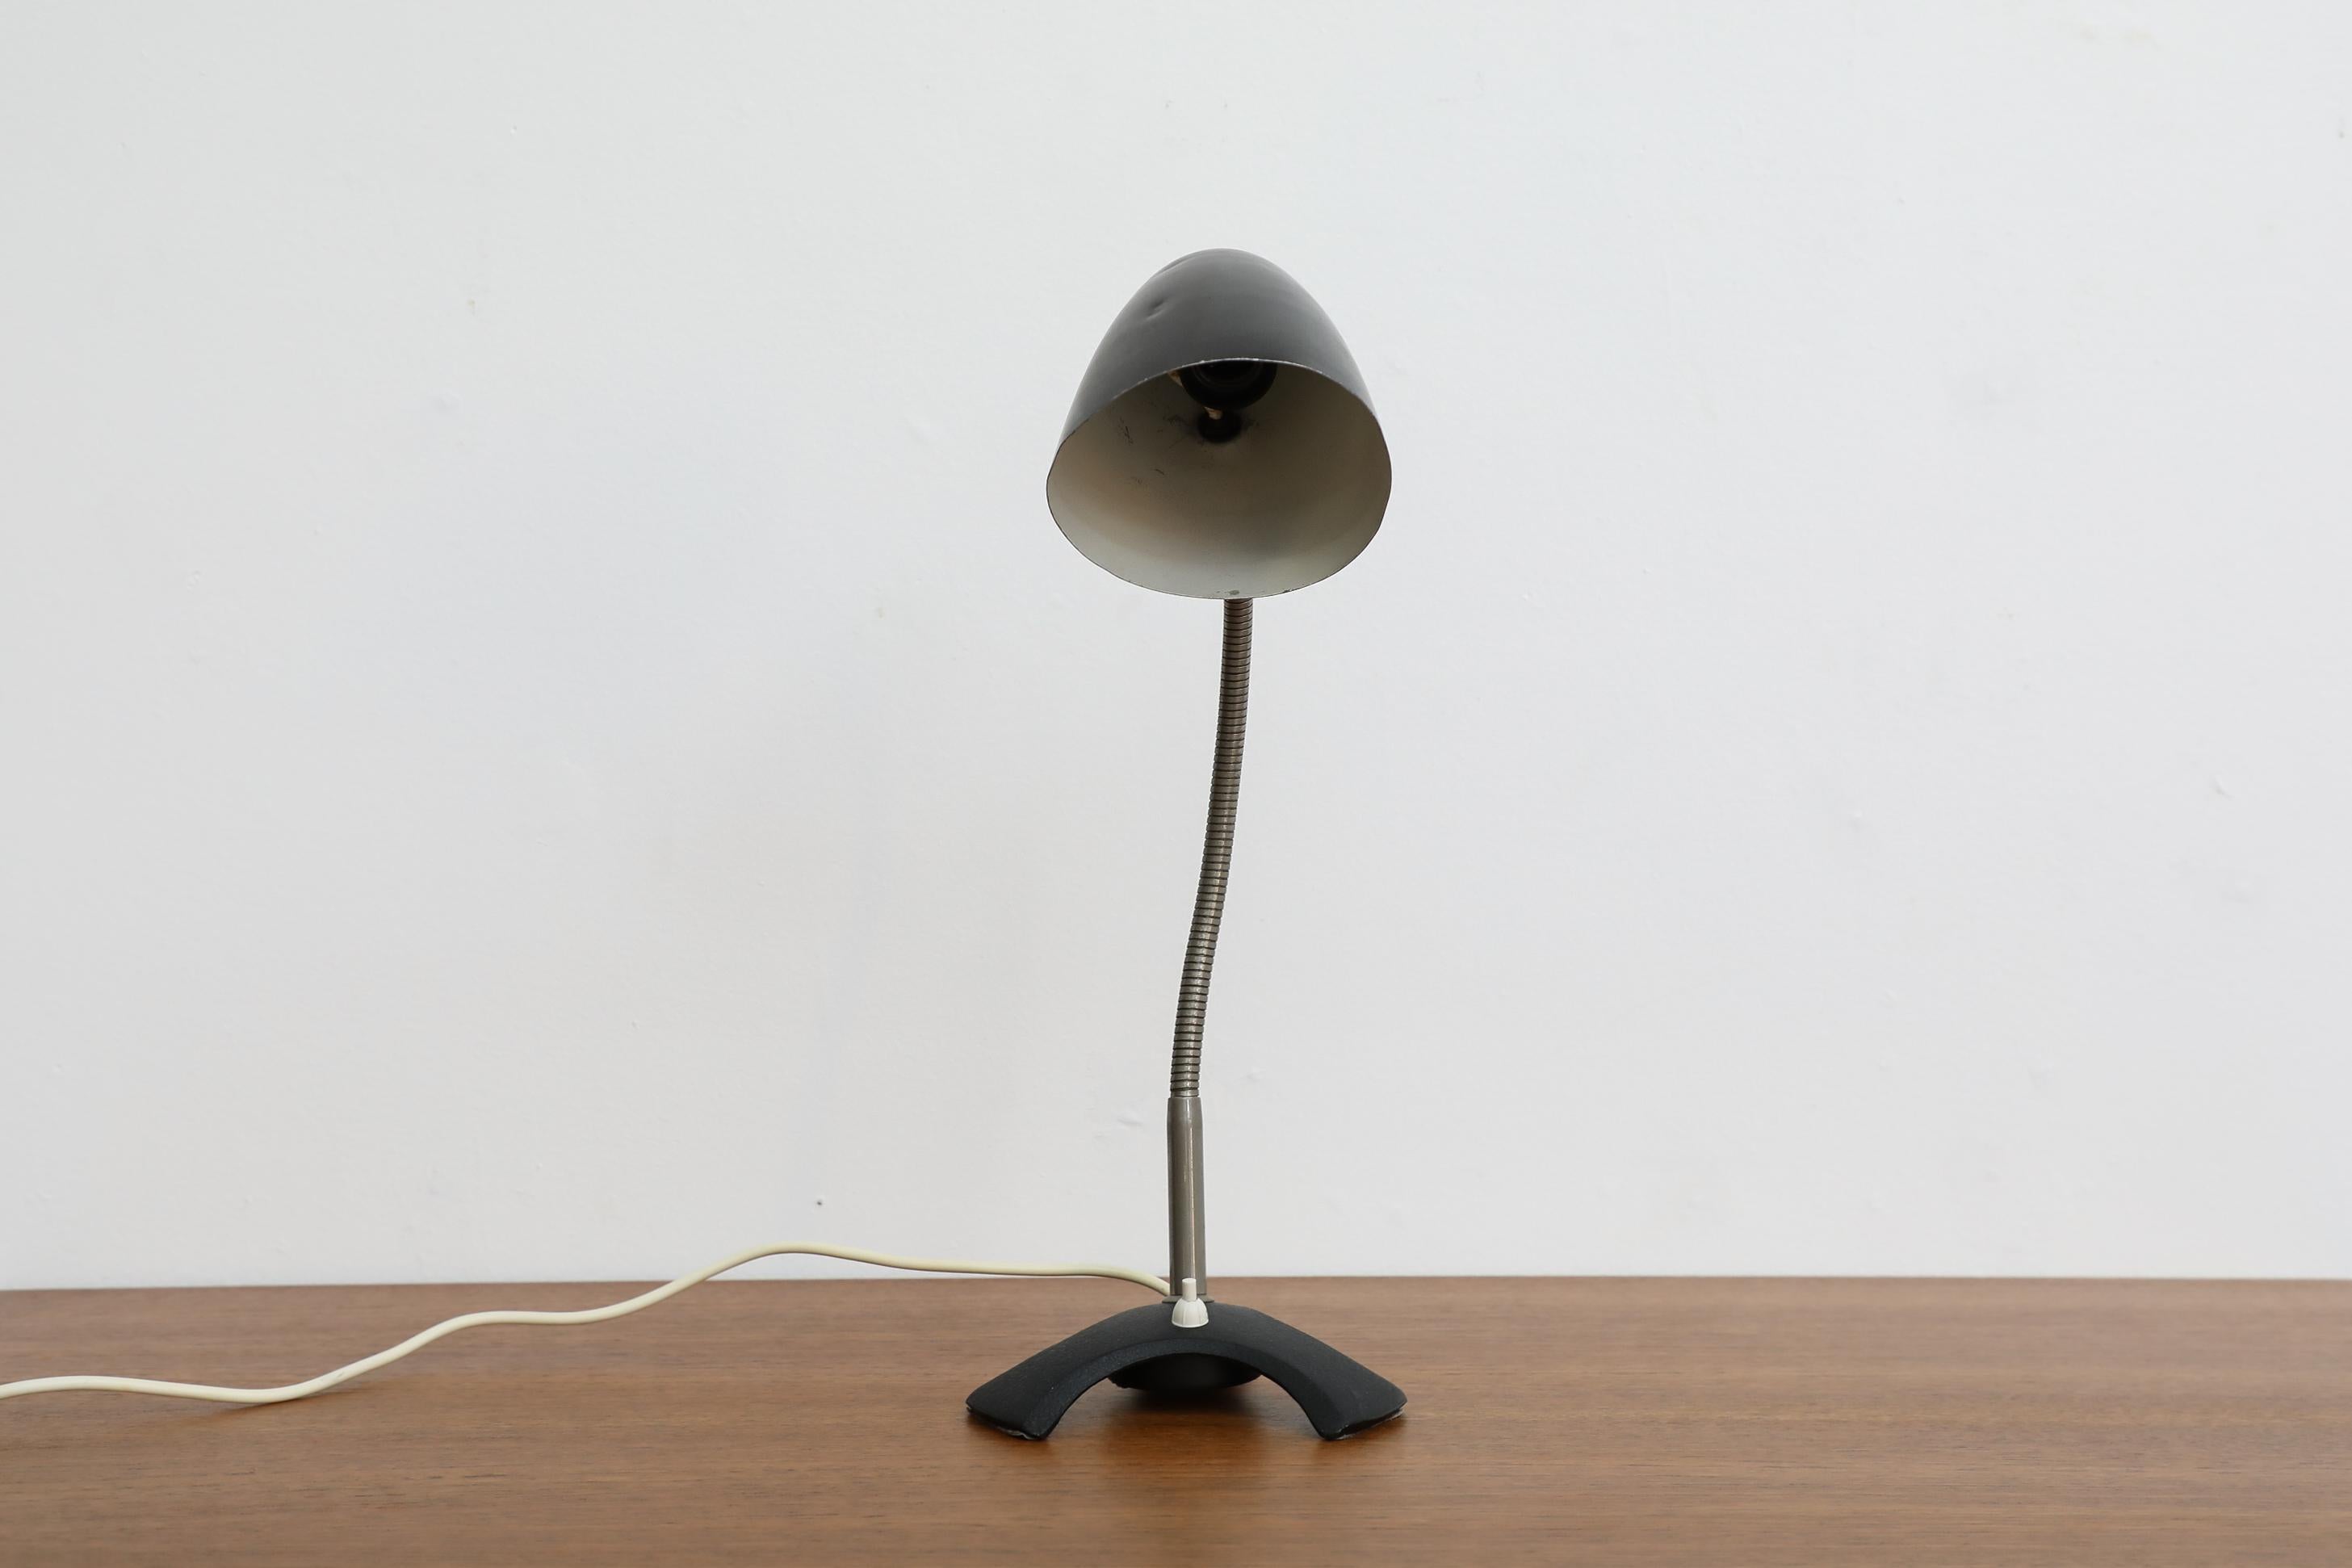 Mid-Century, Bauhaus style, goose neck desk lamp with black enameled shade and metal base. Adjustable in all directions. In original condition with visible wear, including scratches. Wear is consistent with its age and